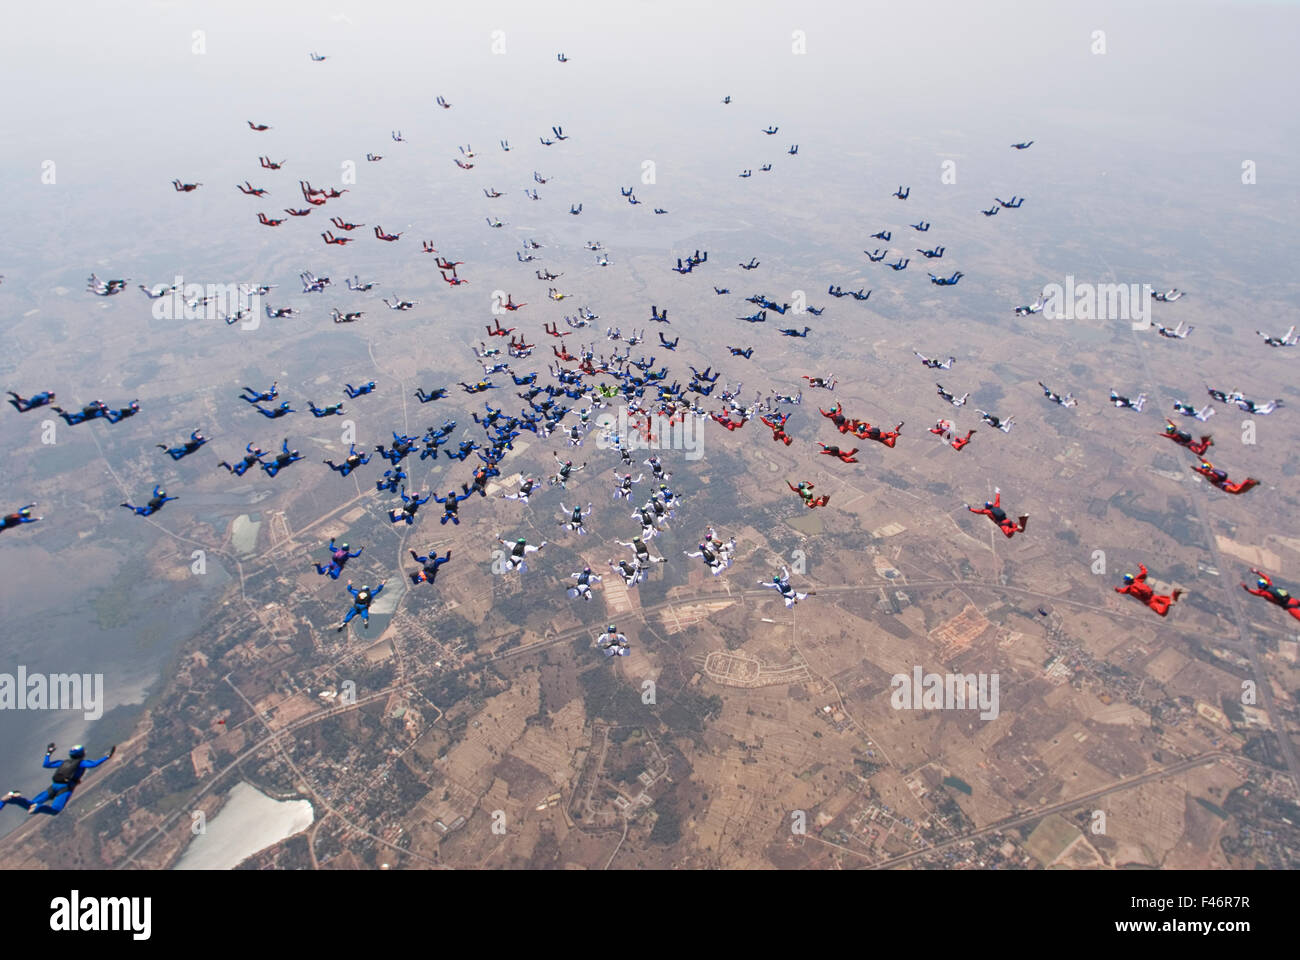 Parachute jumpers trying to make a world record in formation jump. Stock Photo